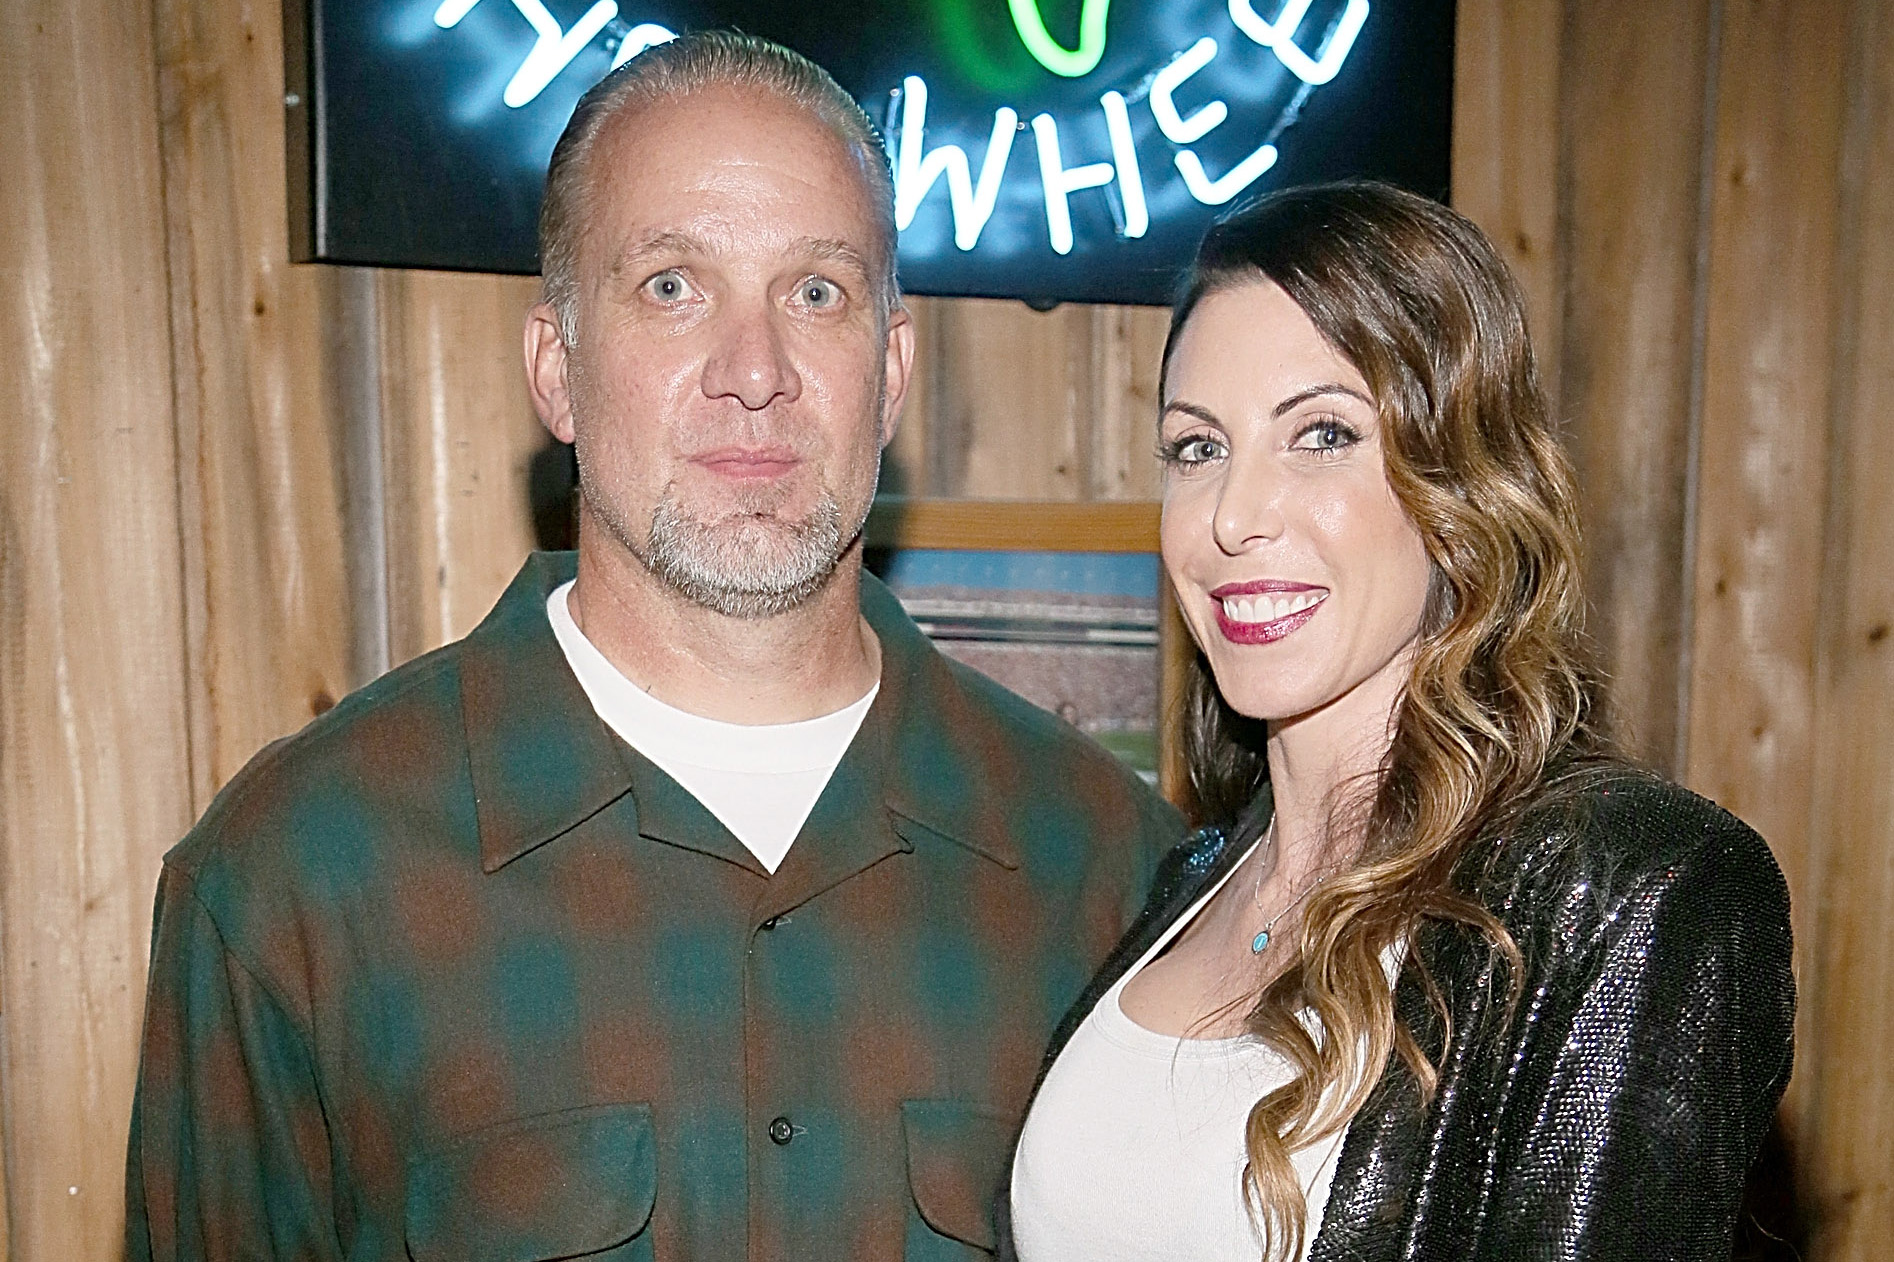 Jesse James Caught in New Cheating Scandal (EXCLUSIVE)